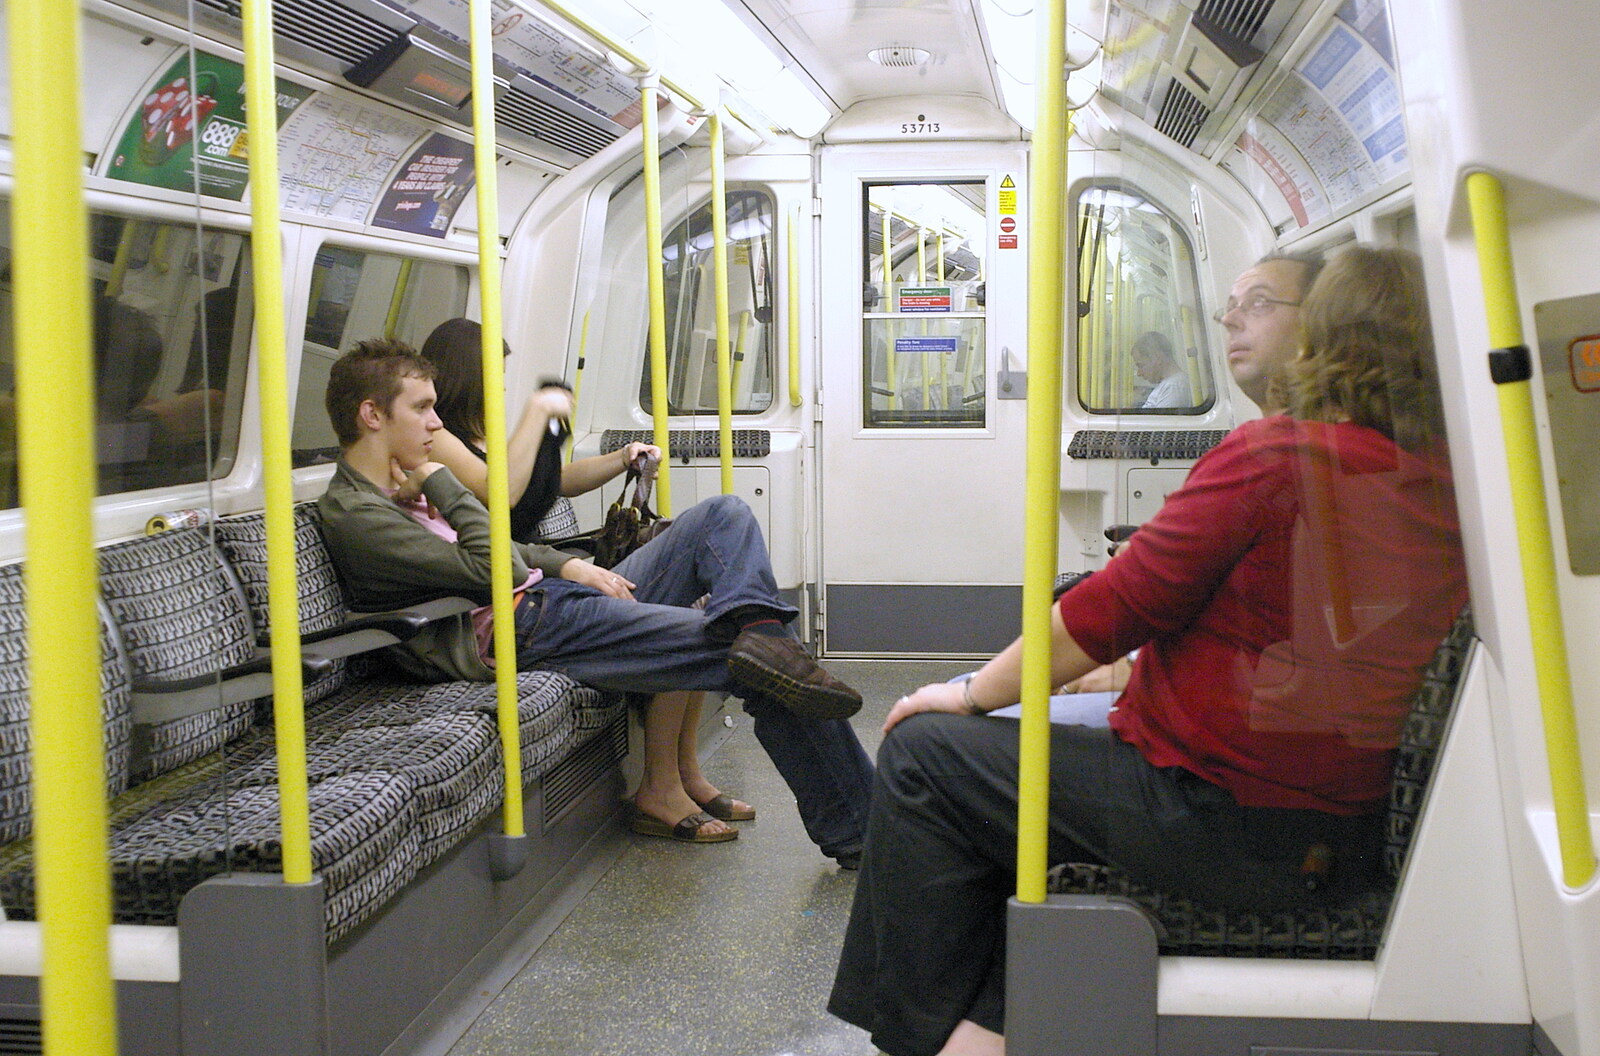 Late-night tube from Borough Market and North Clapham Tapas, London - 23rd July 2005